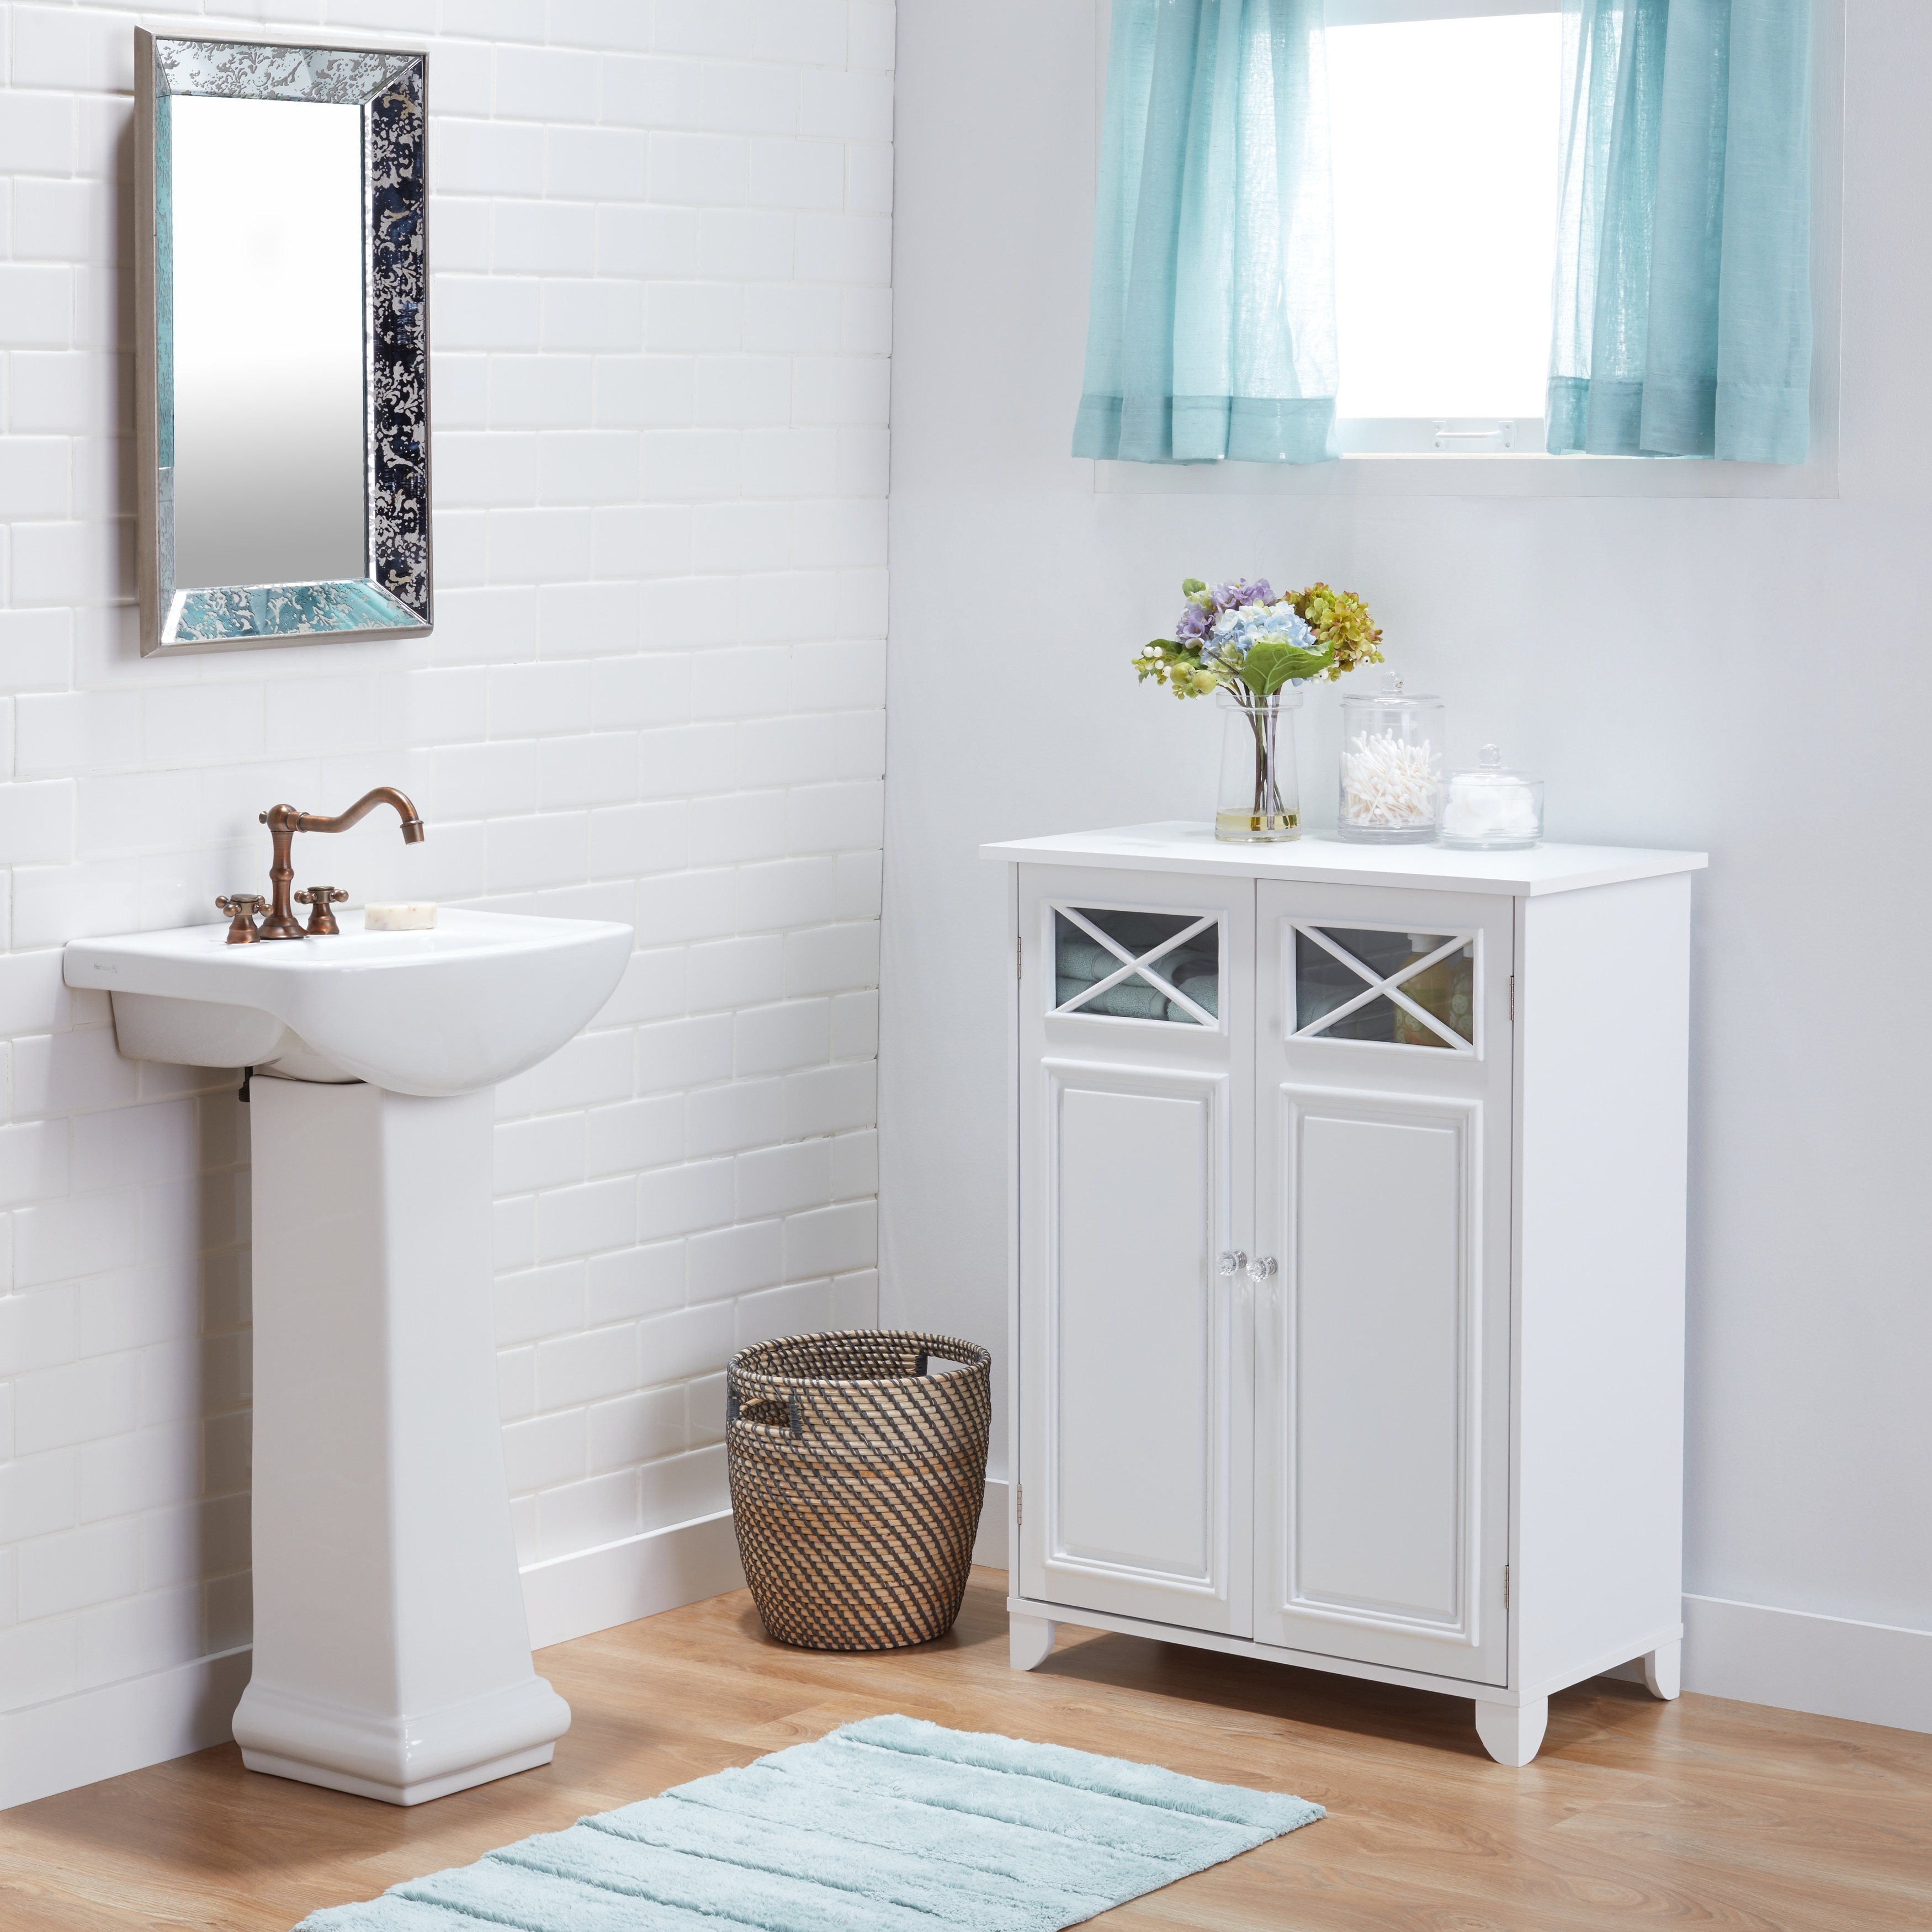 BATHROOM FURNITURE AND CABINETS